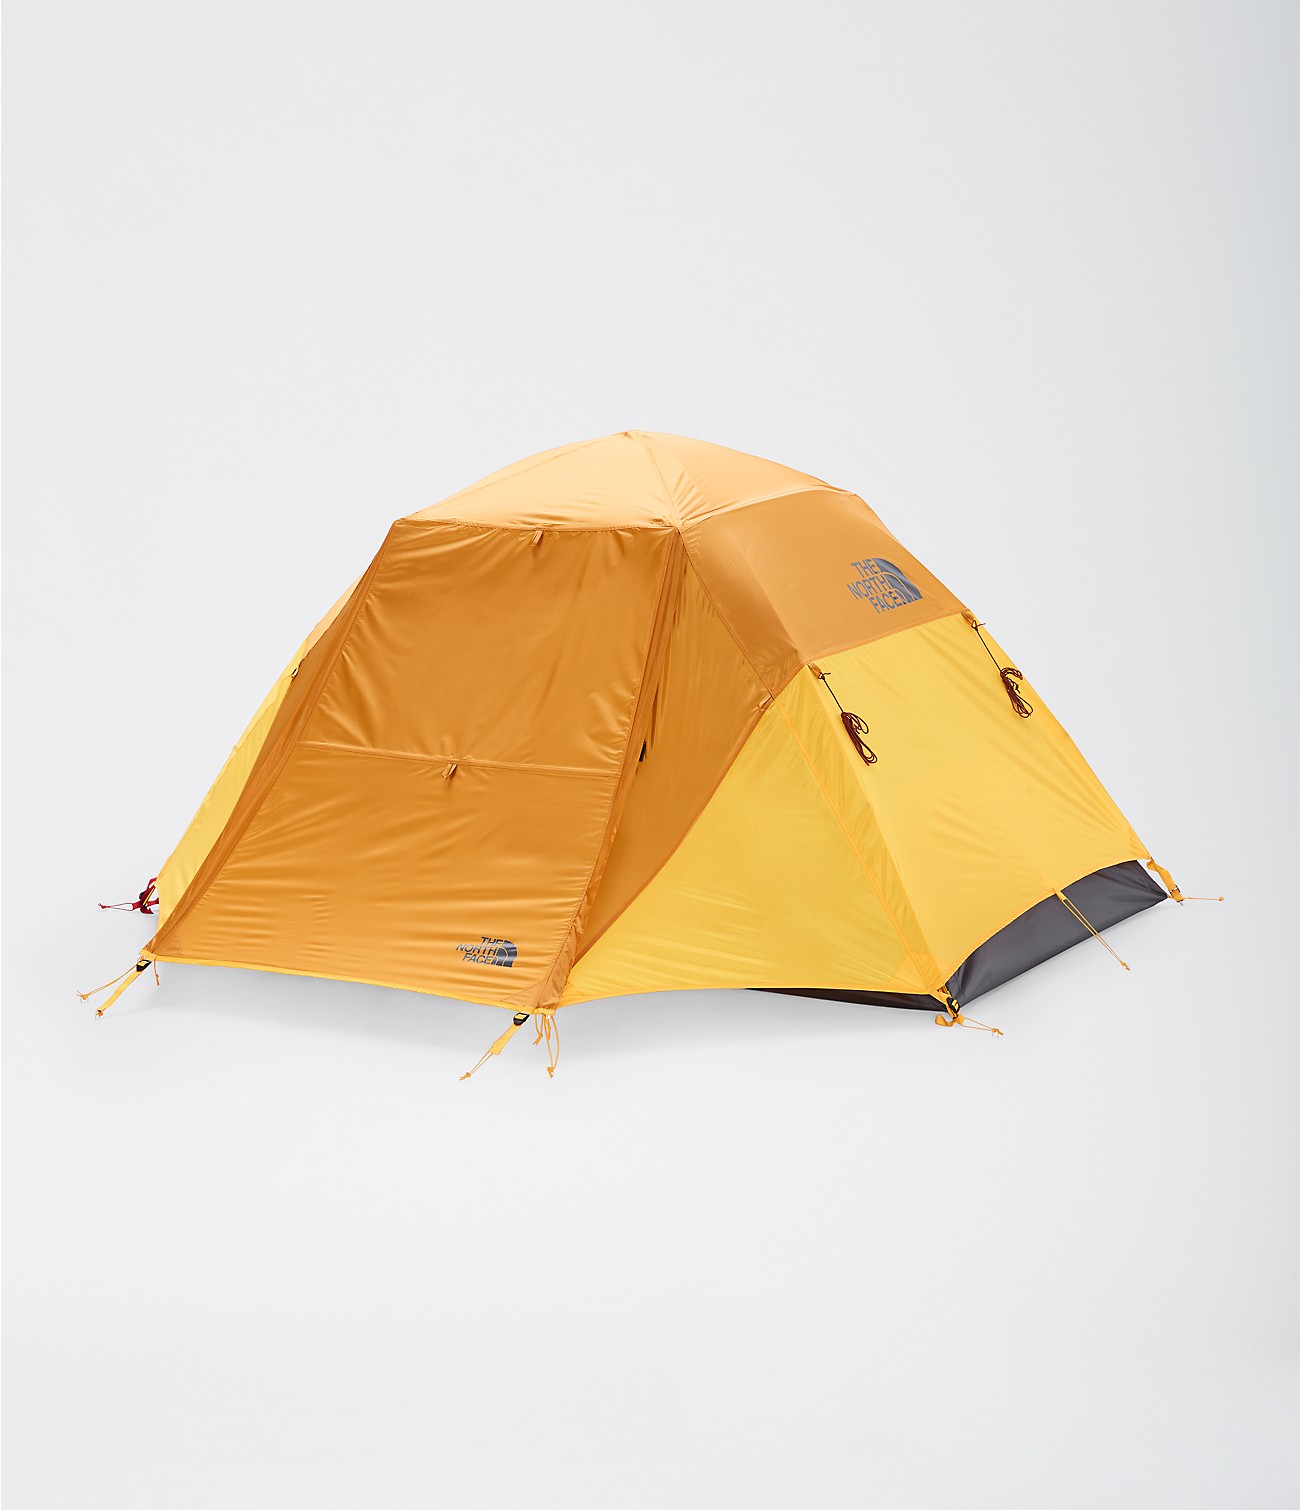 Unlock Wilderness' choice in the Rei Vs North Face comparison, the Stormbreak 2 Tent by The North Face